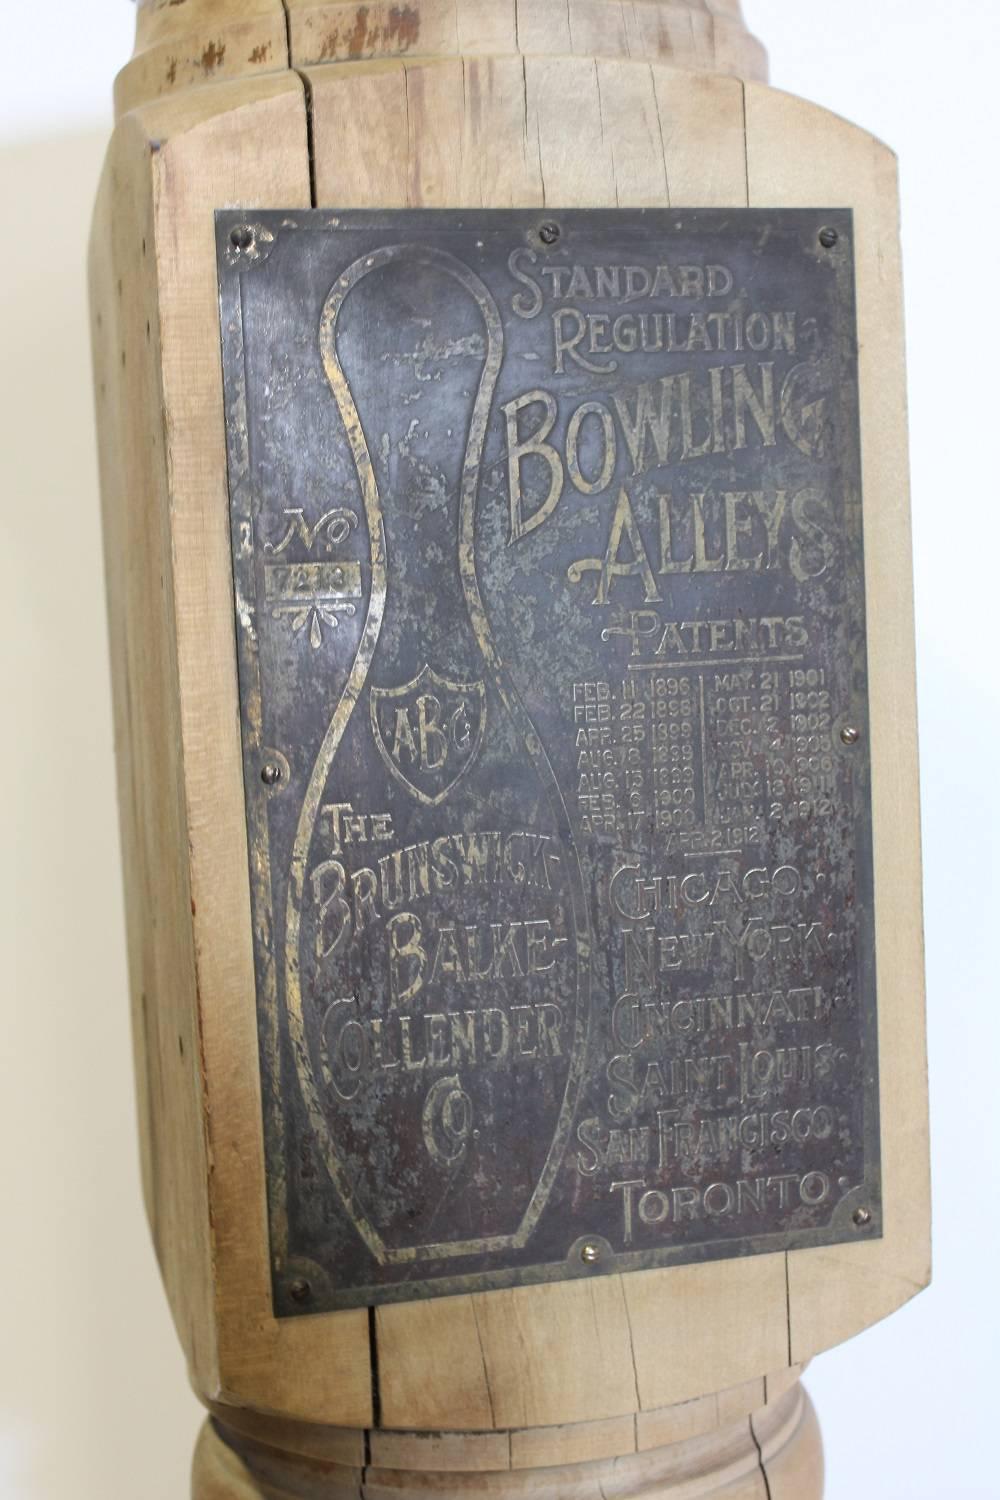 Antique bowling alley ball return post by Brunswick Balke Collender company.